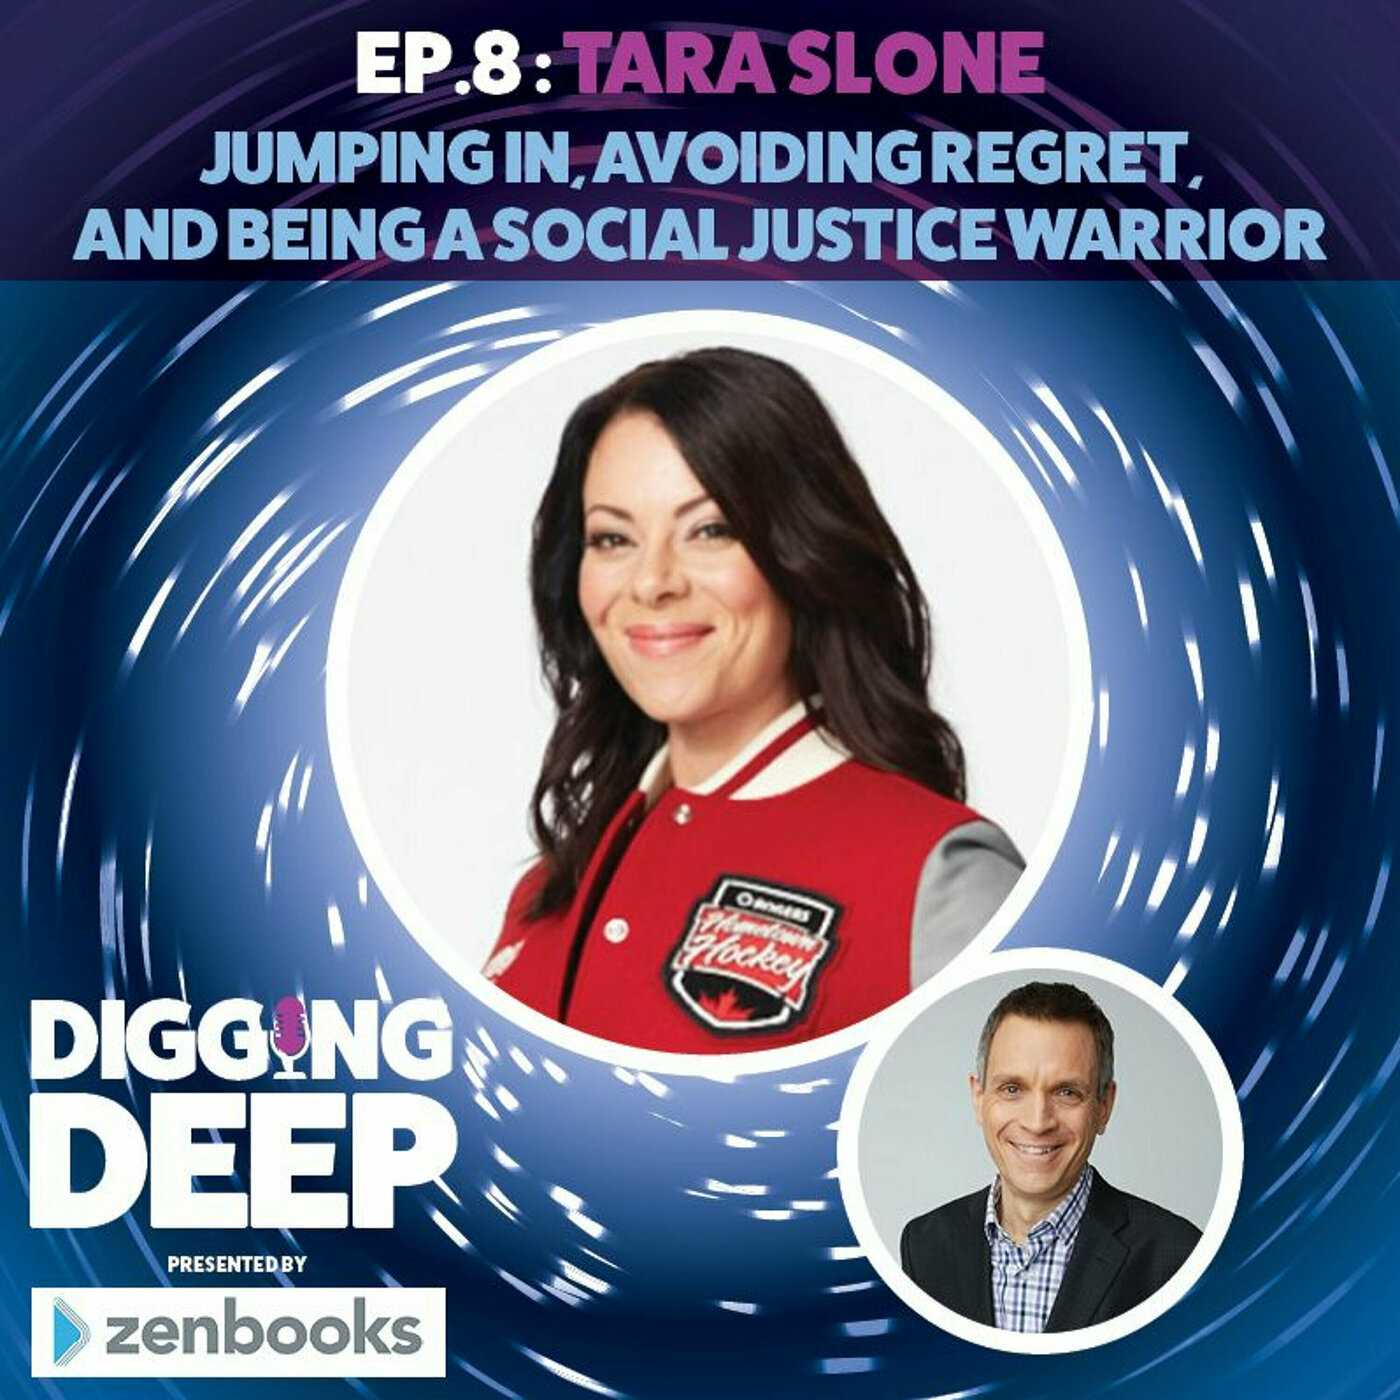 Tara Slone: Jumping In, Avoiding Regret, and Being a Social Justice Warrior